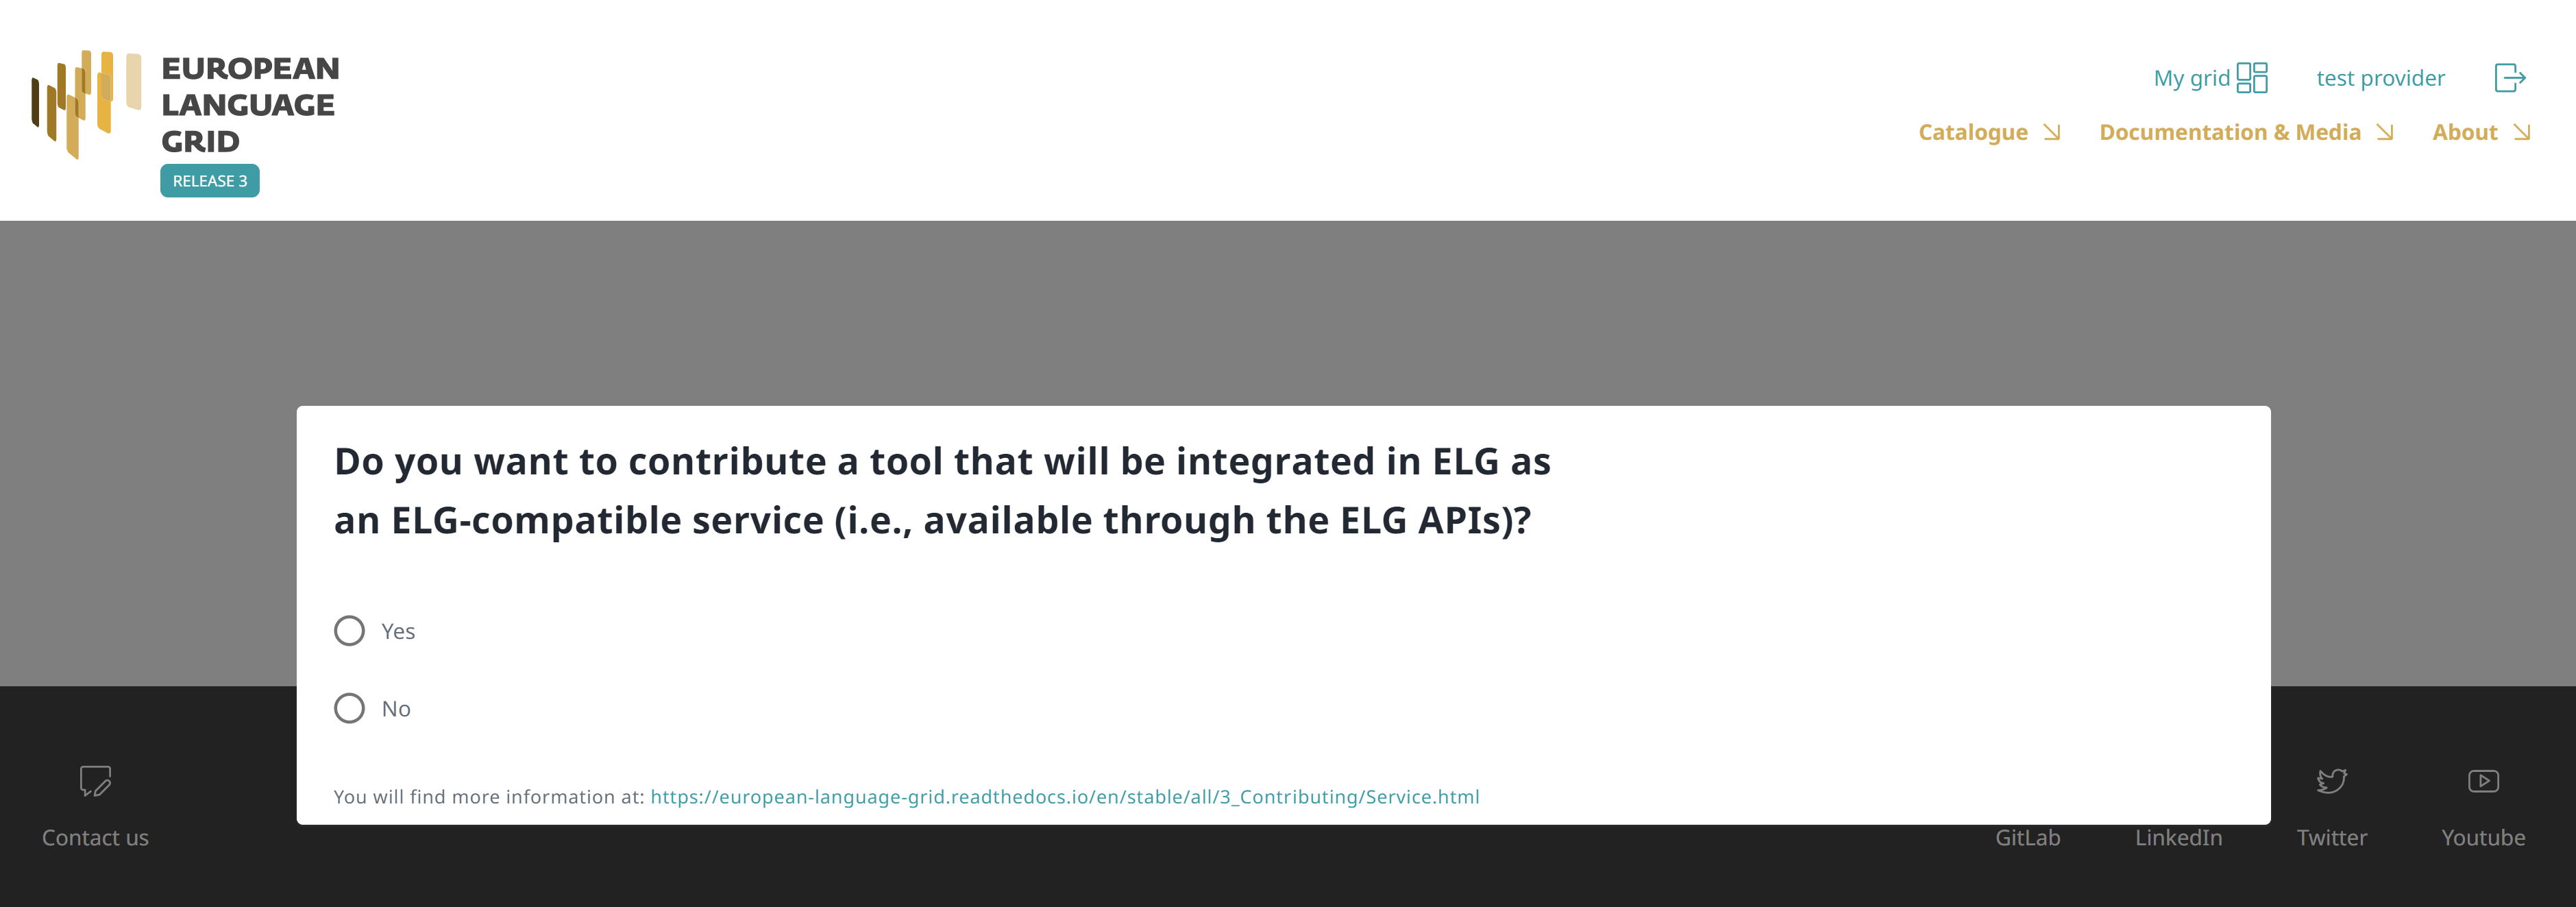 Select "yes" for ELG-compatible services